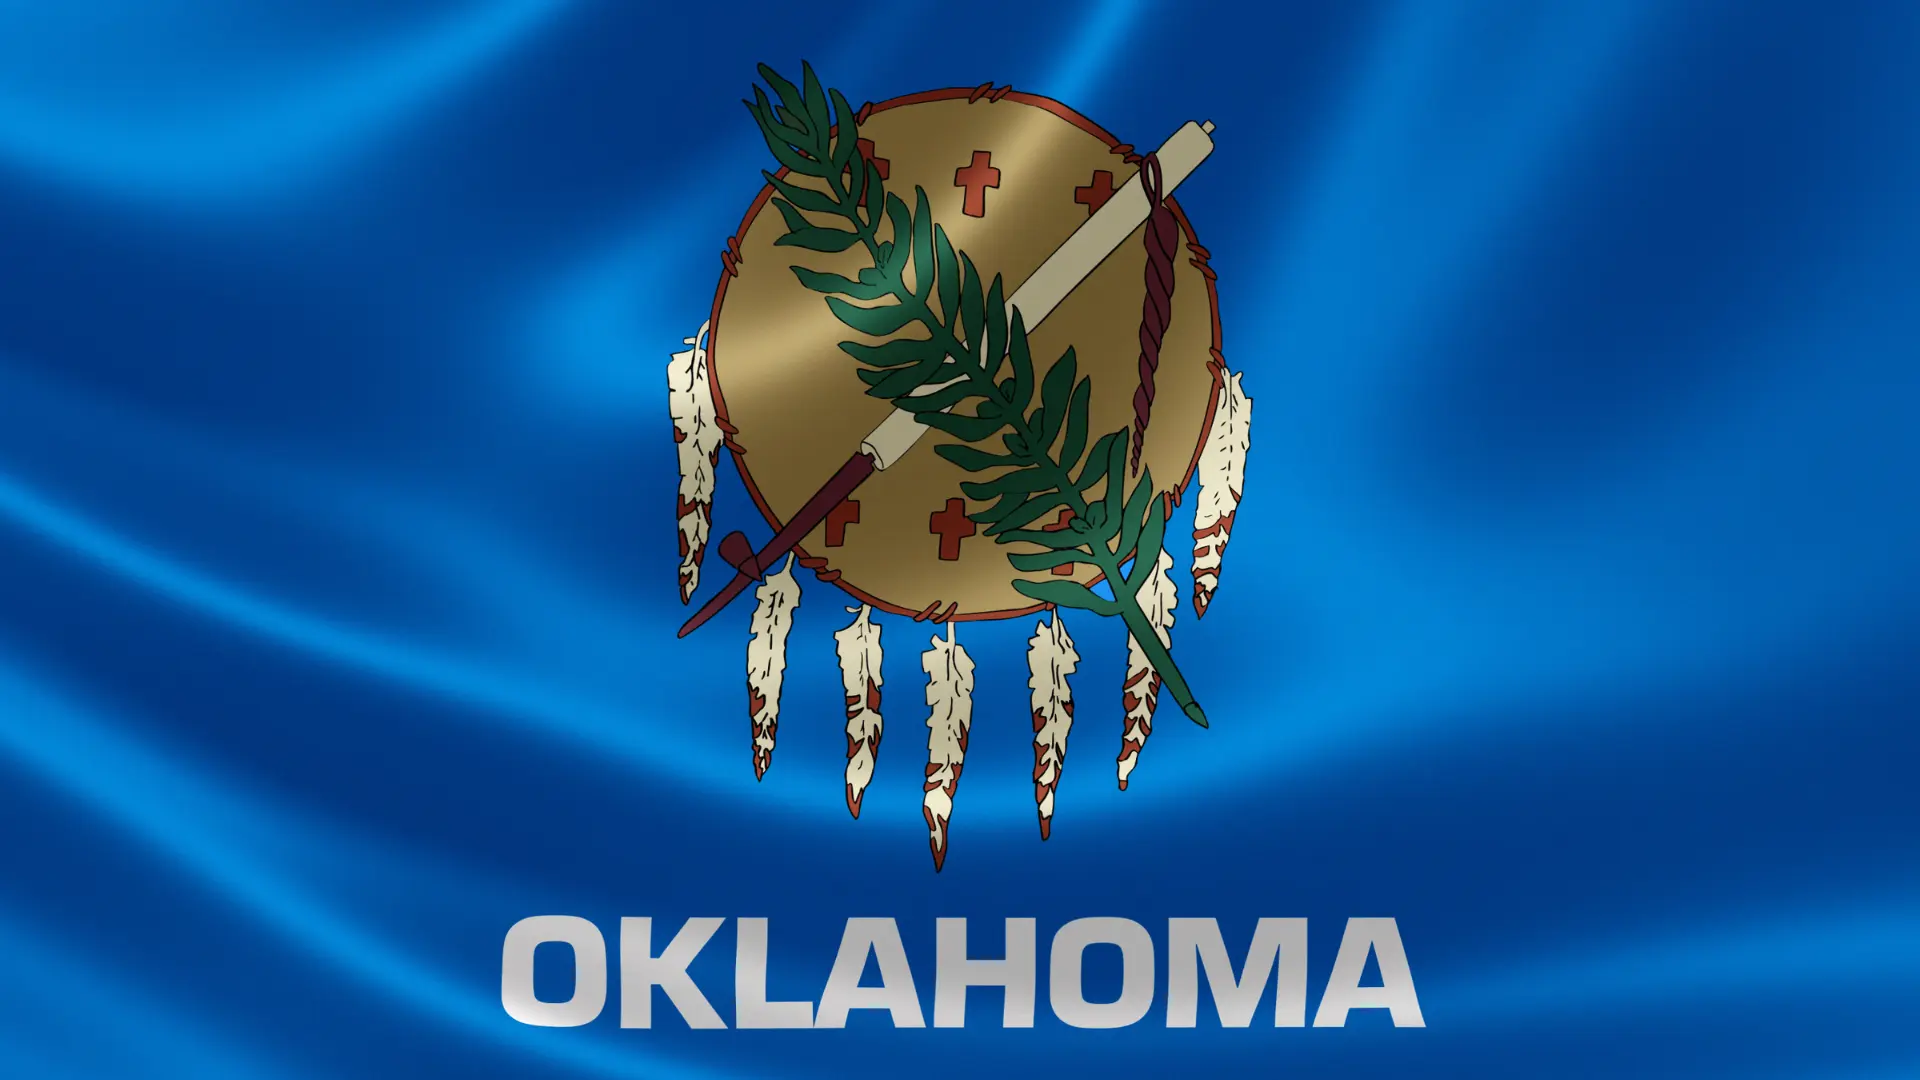 Oklahoma Highway Patrol  For everyone wanting to see Trooper Callicoats  new tattoo Hes not revealing what it means though  but I bet hed like  to see your guesses LivePD LivePDNation 